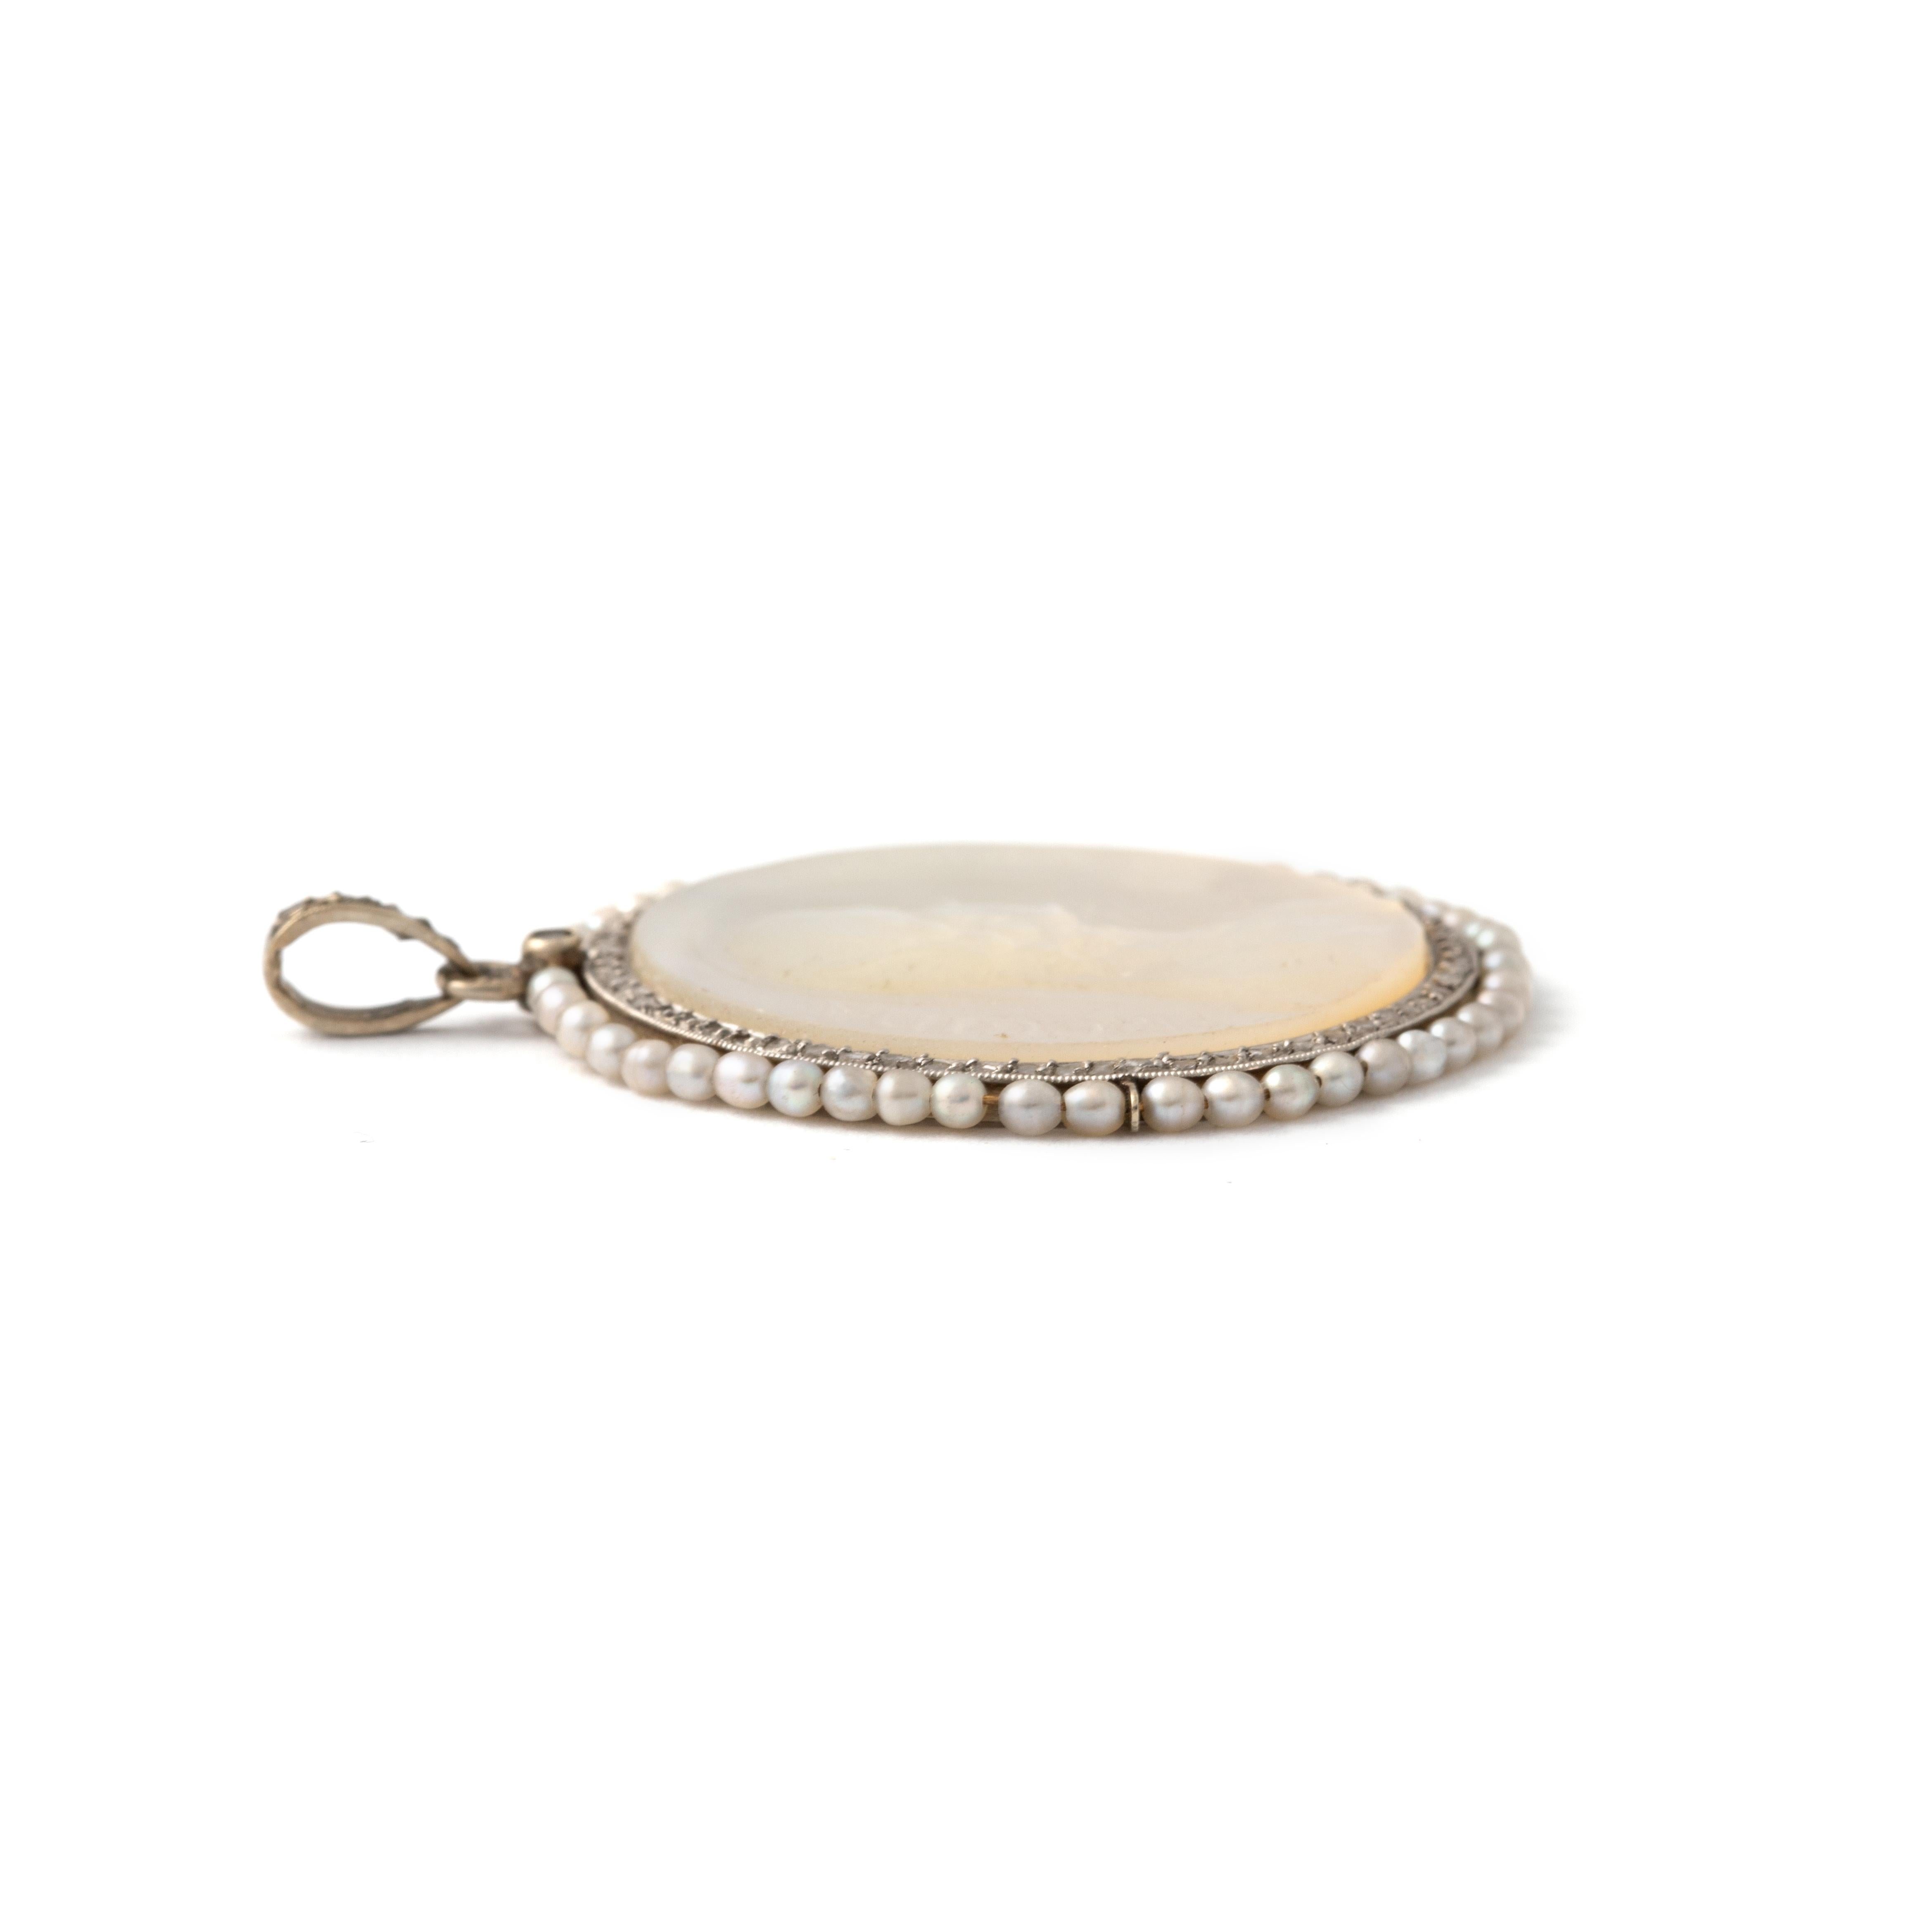 Mother-of-Pearl, rose-cut Diamond and Pearl on White Gold Pendant representing Regina Caeli. 
20th Century.

Total length: approx. 3.70 centimeters / 1.46 inches.
Total width: approx. 3.00 centimeters / 1.18 inches.

Total weight: 6.18 grams.
